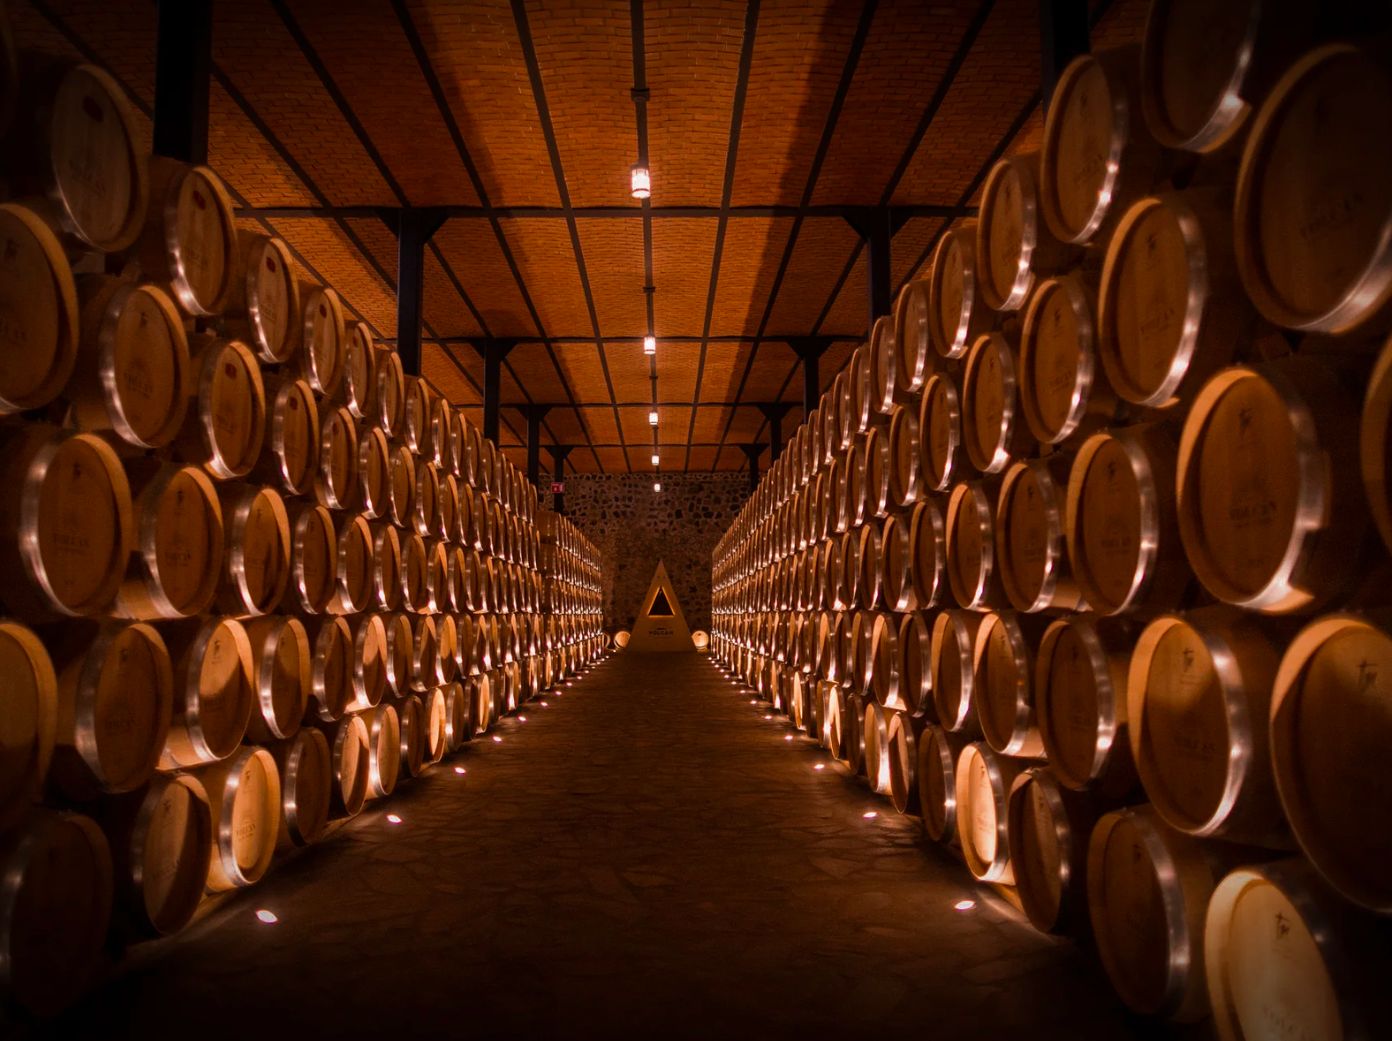 X.A Tequila ageing room